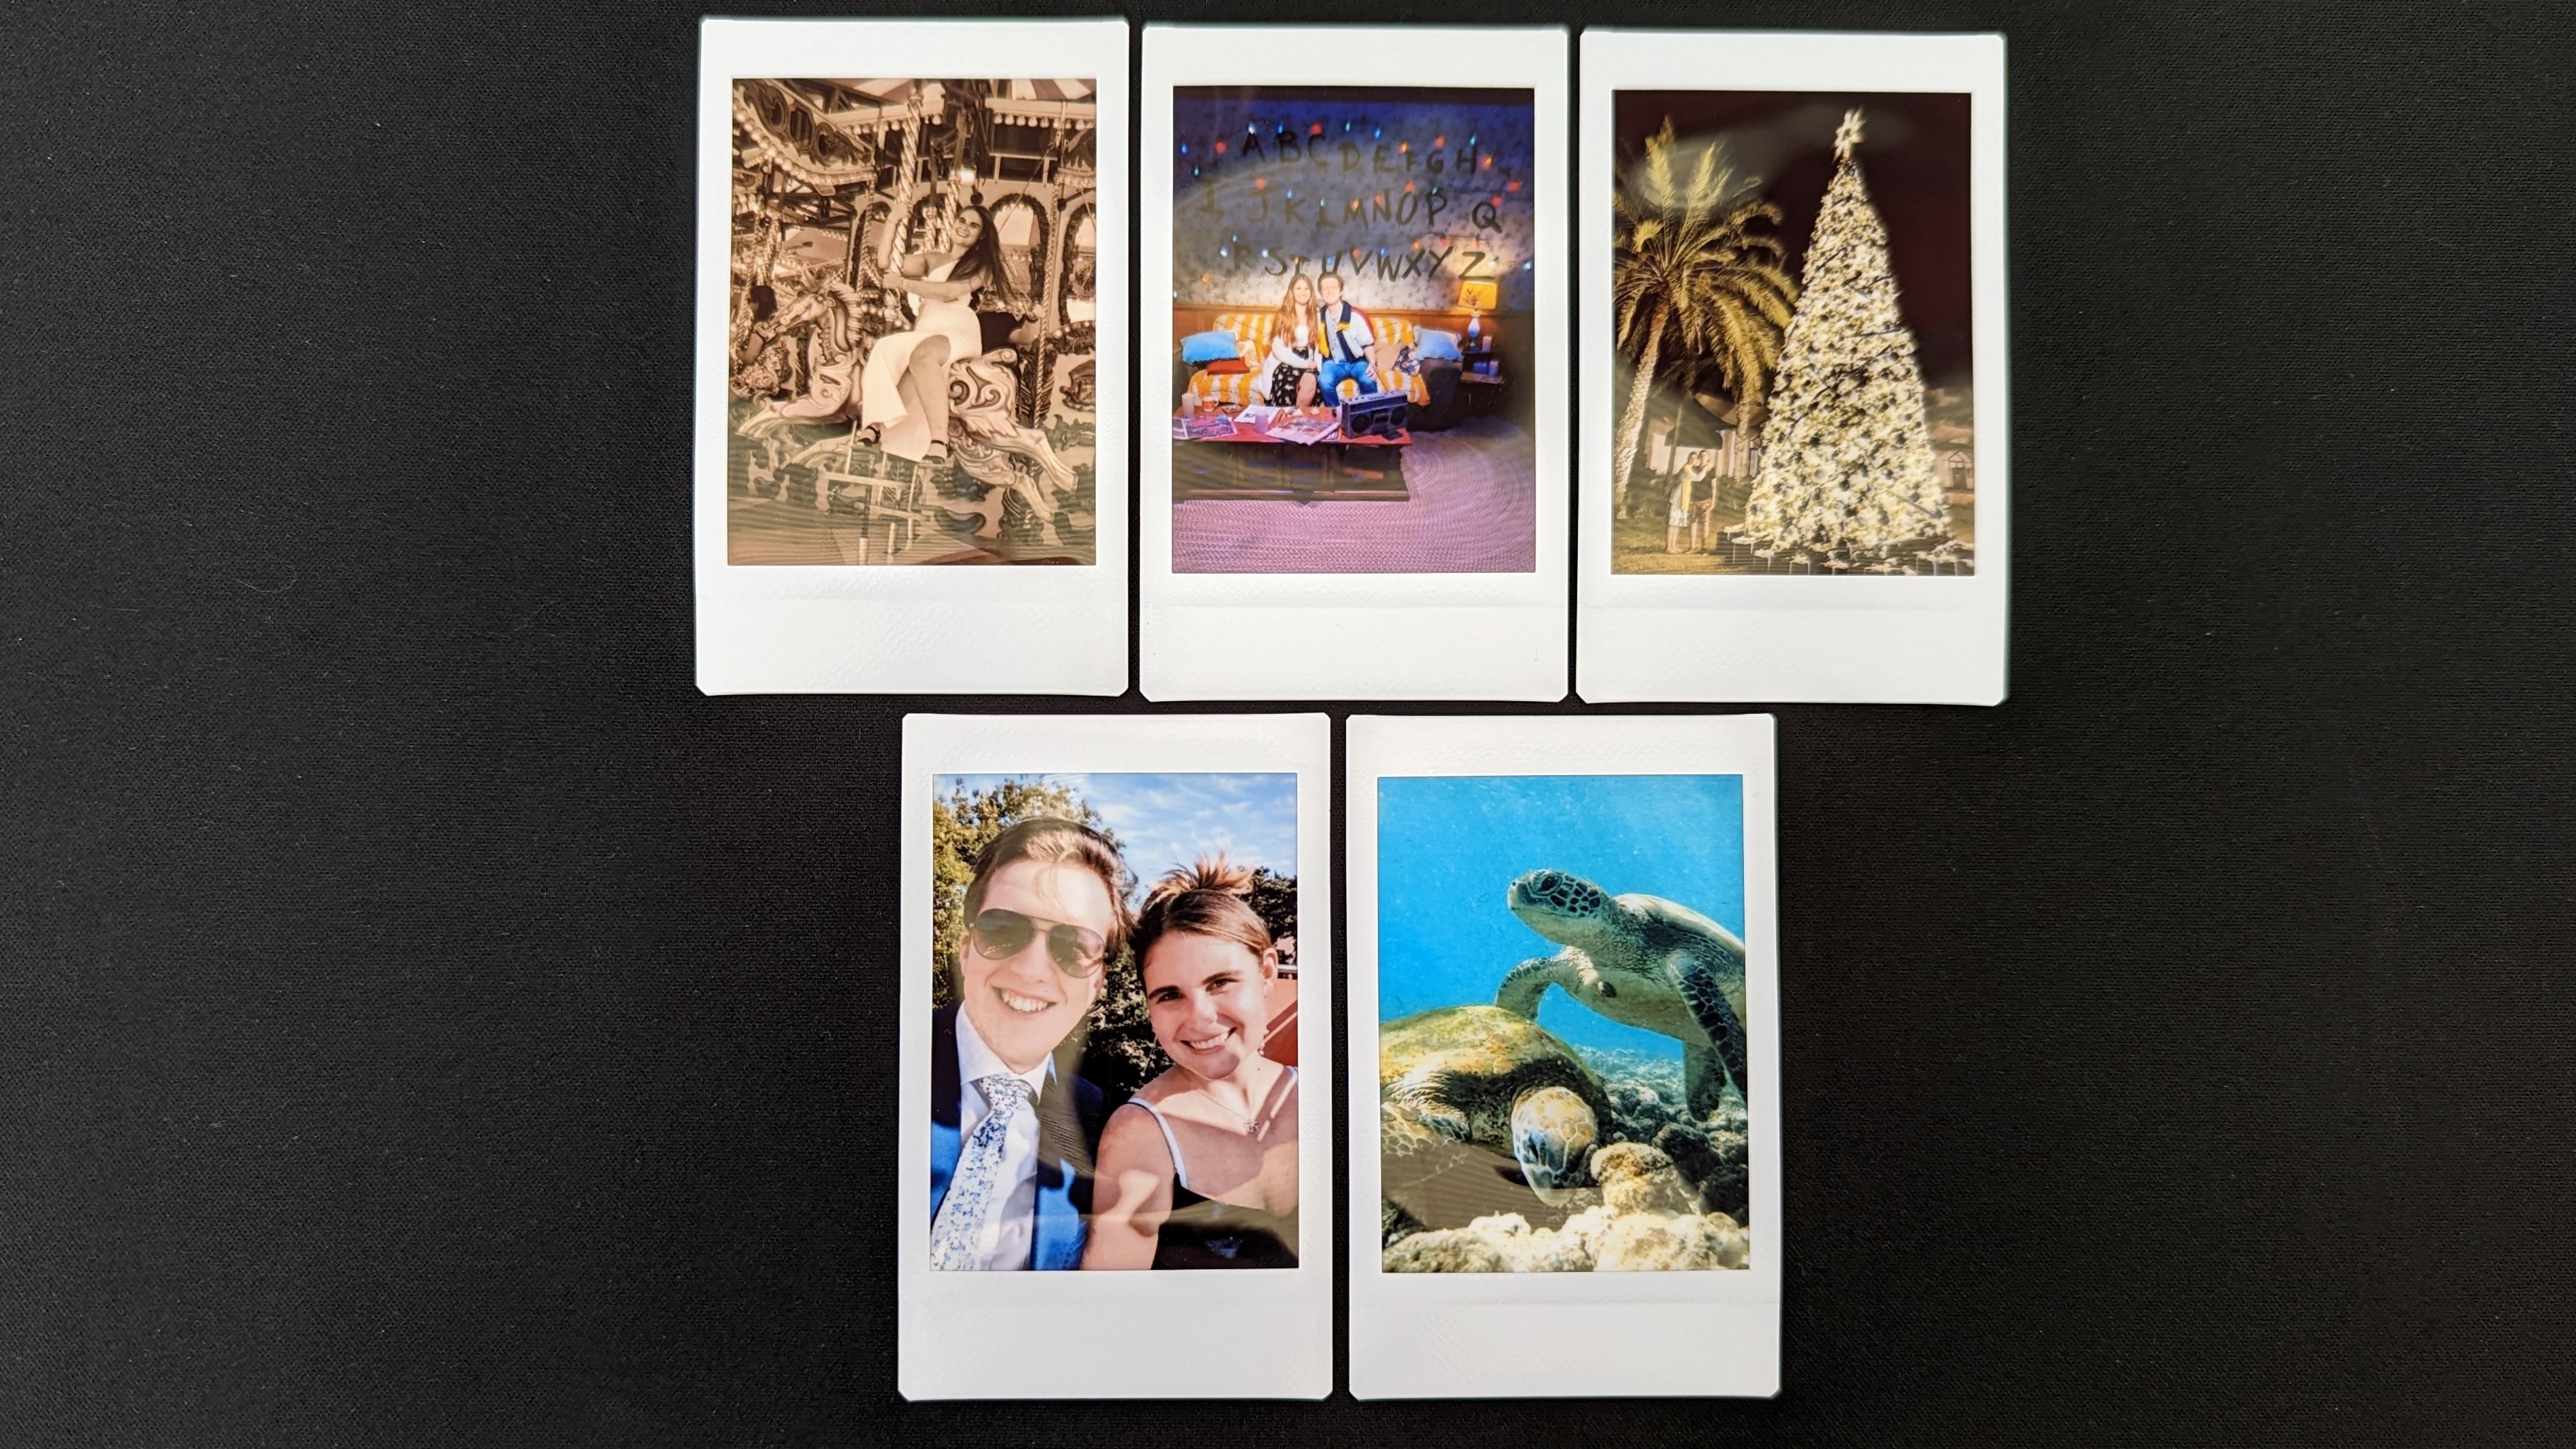 Pictures taken with the Instax Mini Link 2, they include a picture of turtles under the sea and a woman riding a carousel